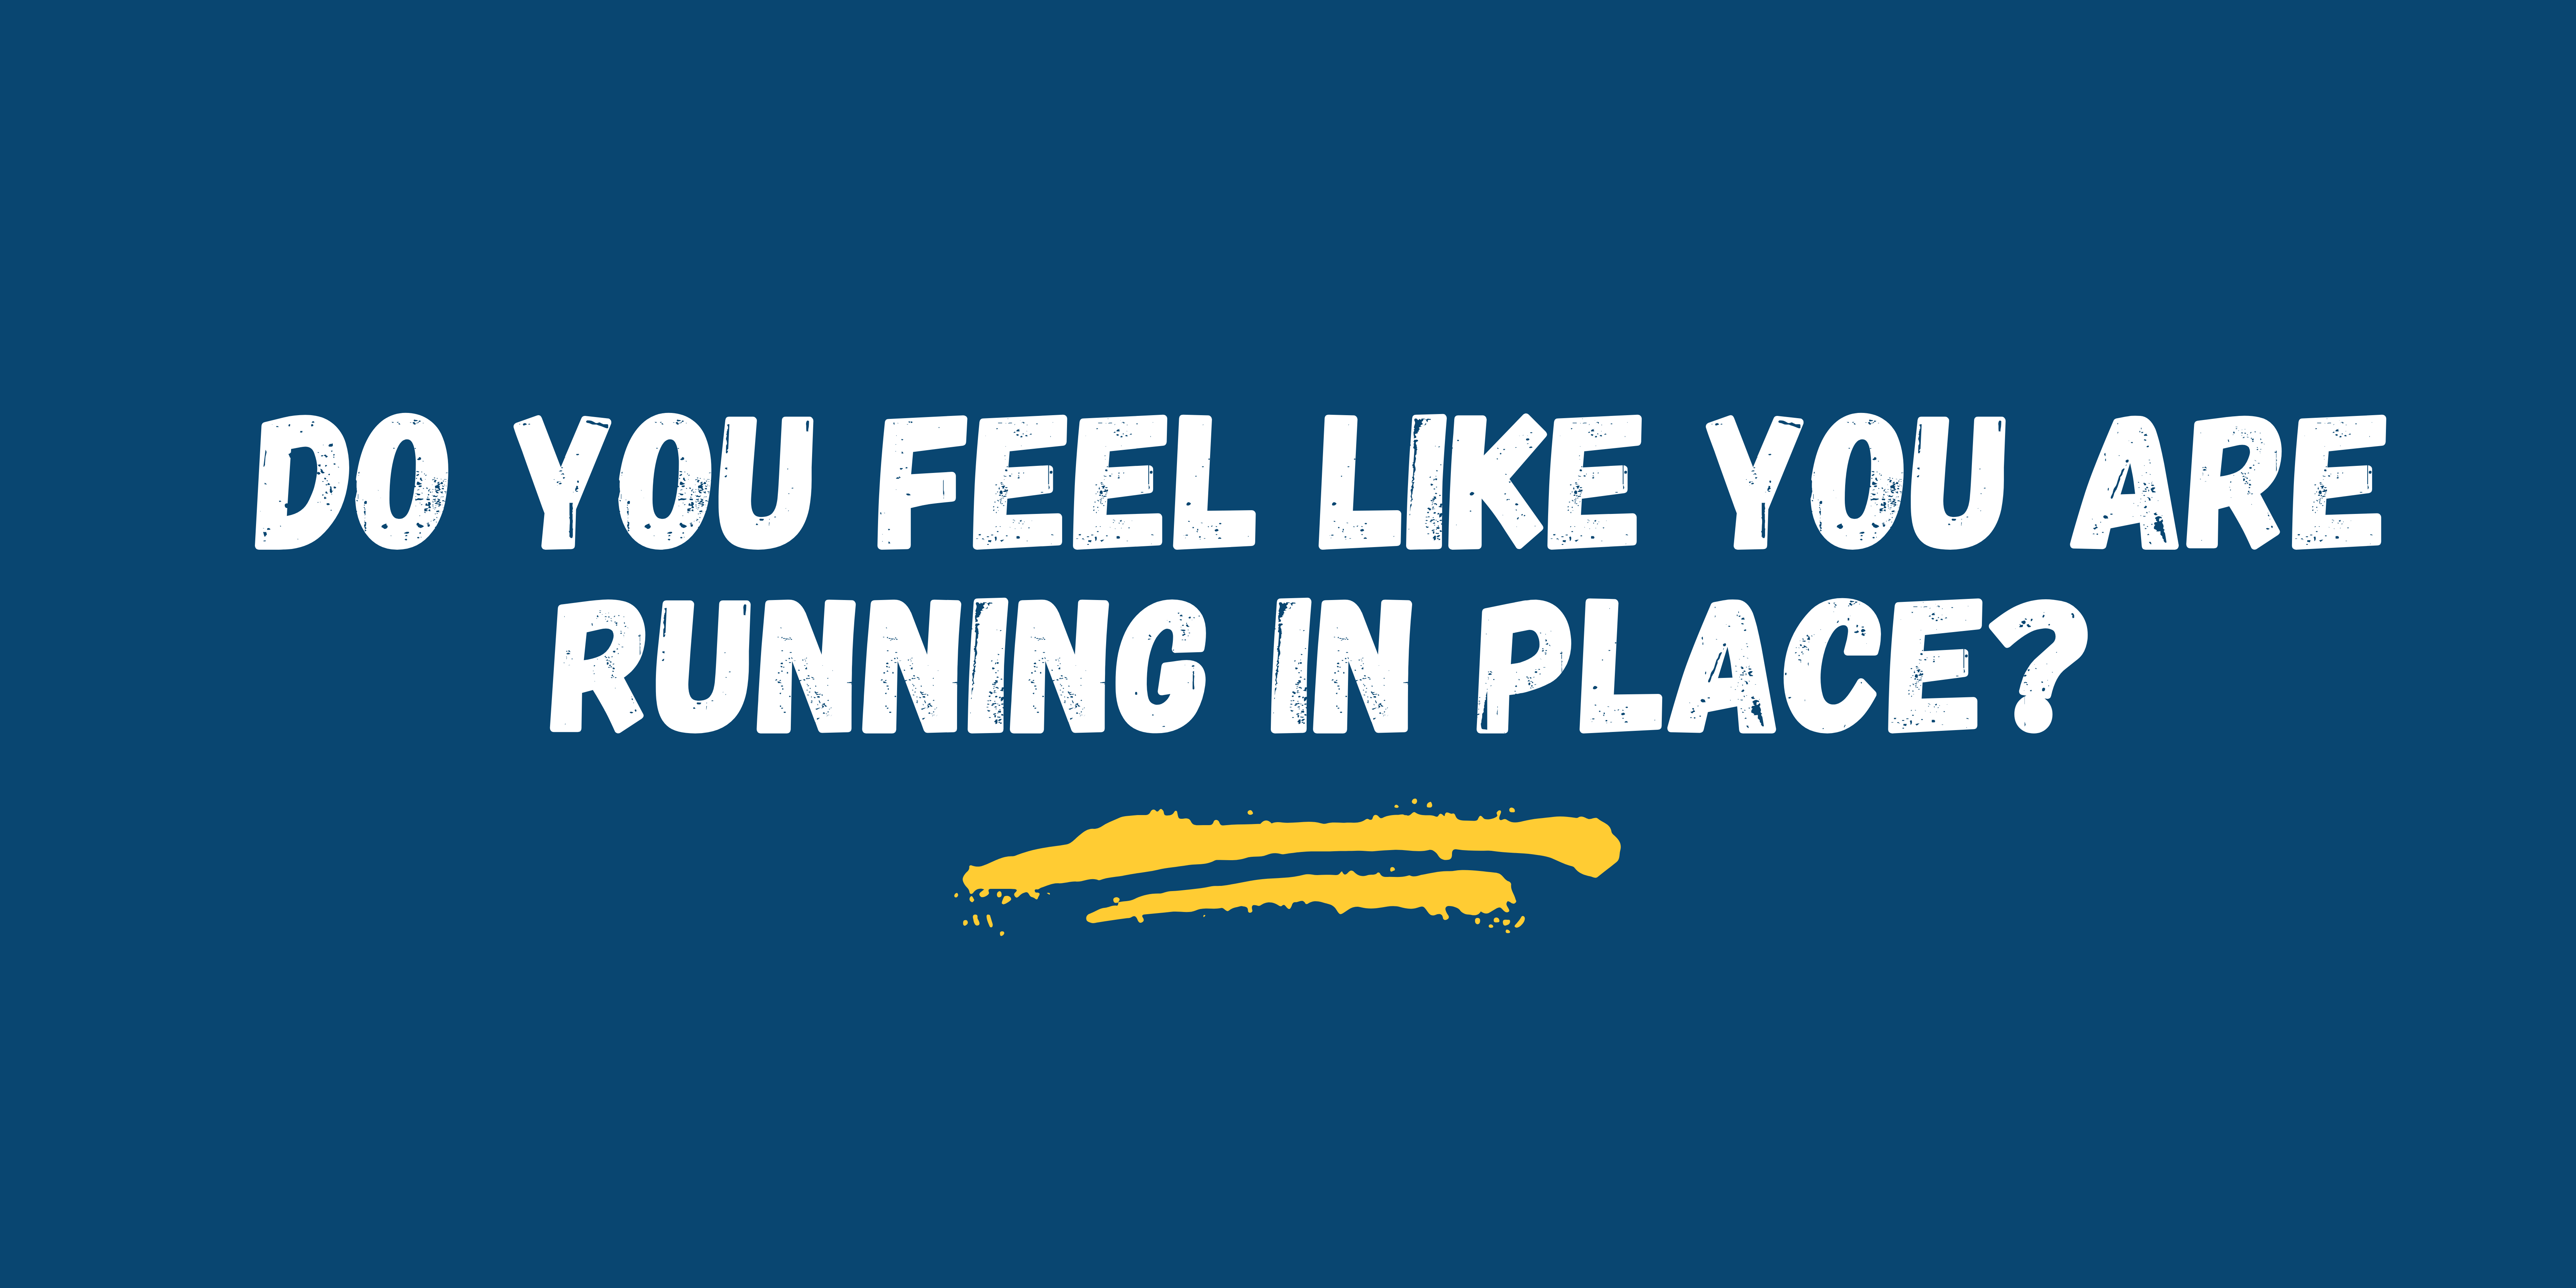 Do you feel like you are running in place?